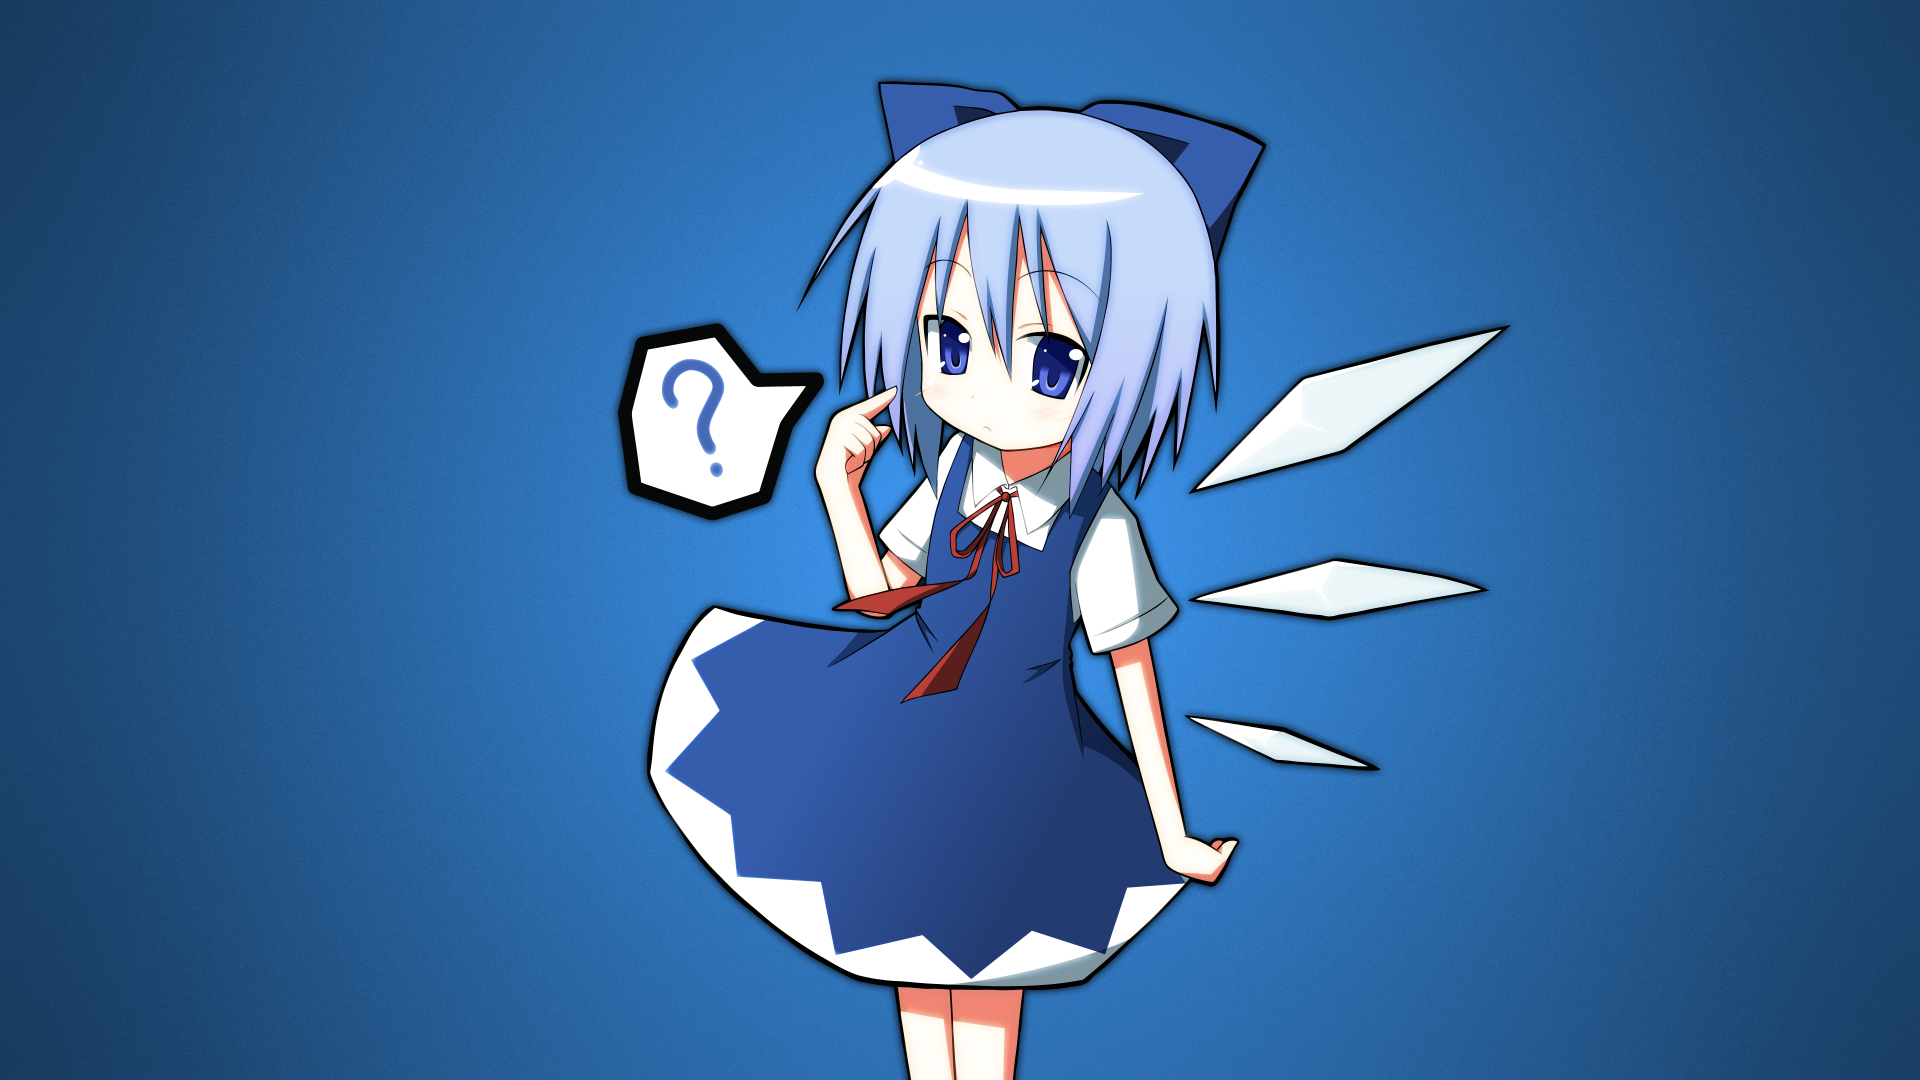 Wallpaper, Touhou, Cirno, simple, anime girls, blue background 1920x1080